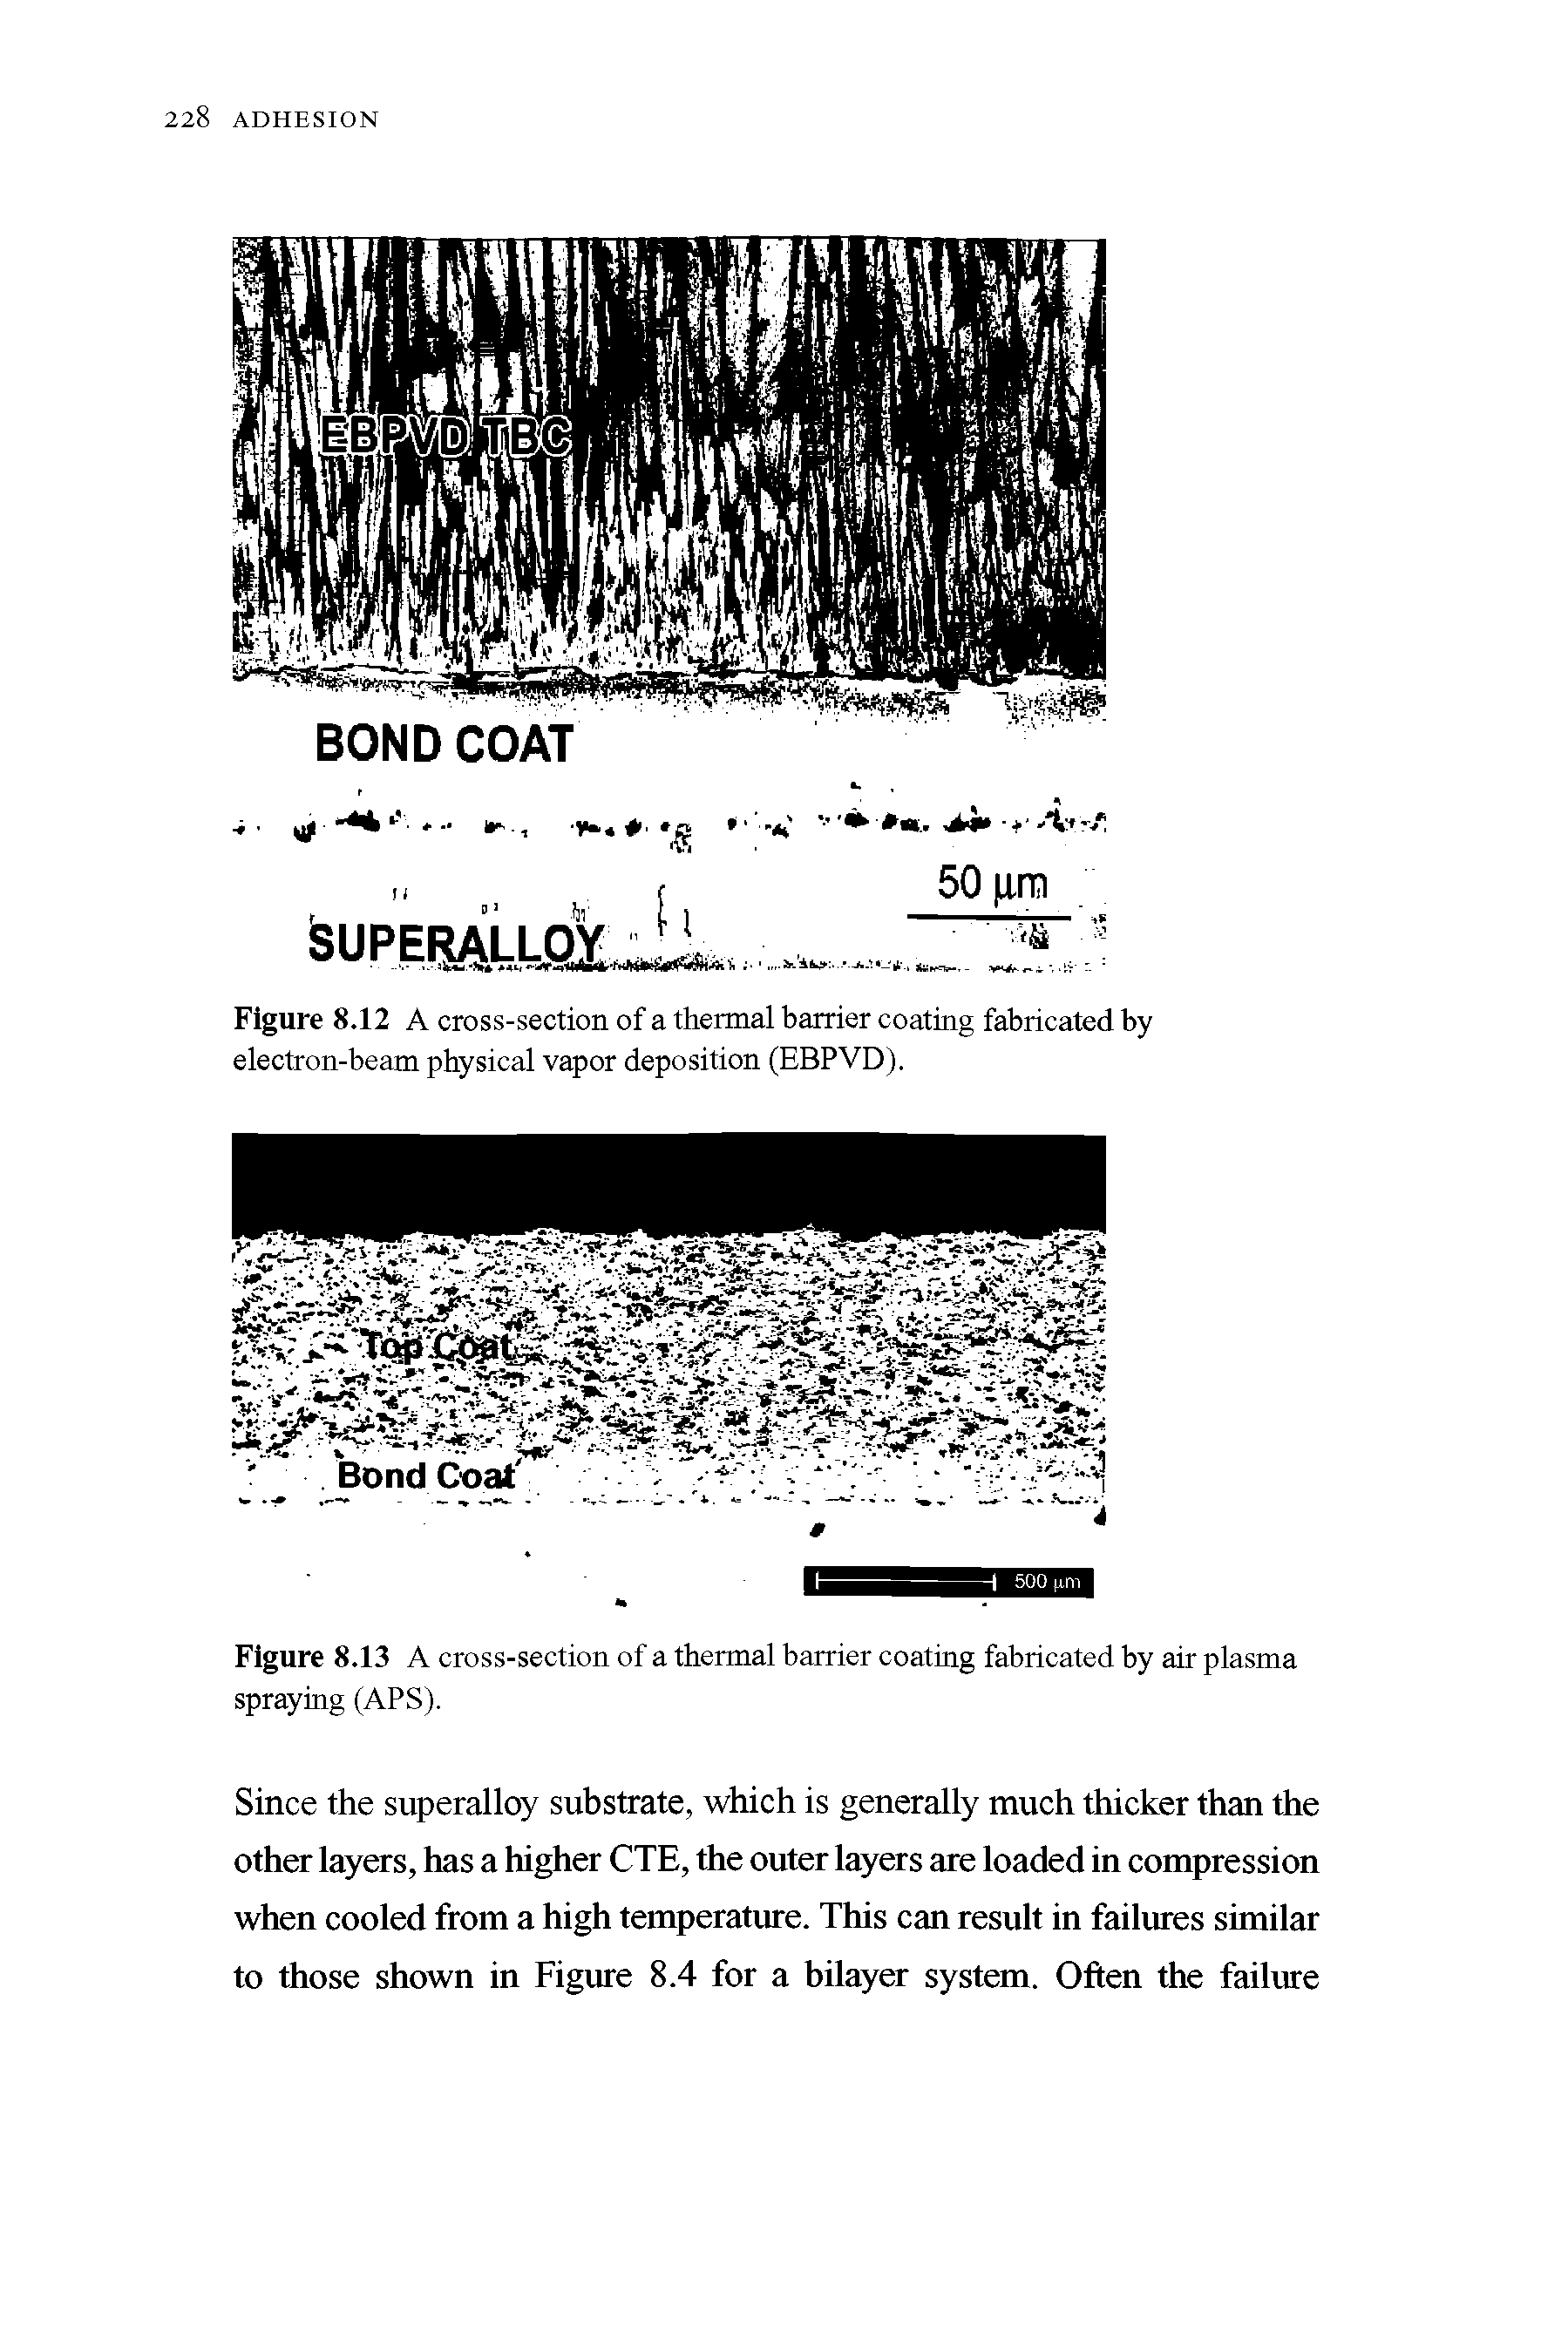 Figure 8.13 A cross-section of a thermal barrier coating fabricated by air plasma spraying (APS).